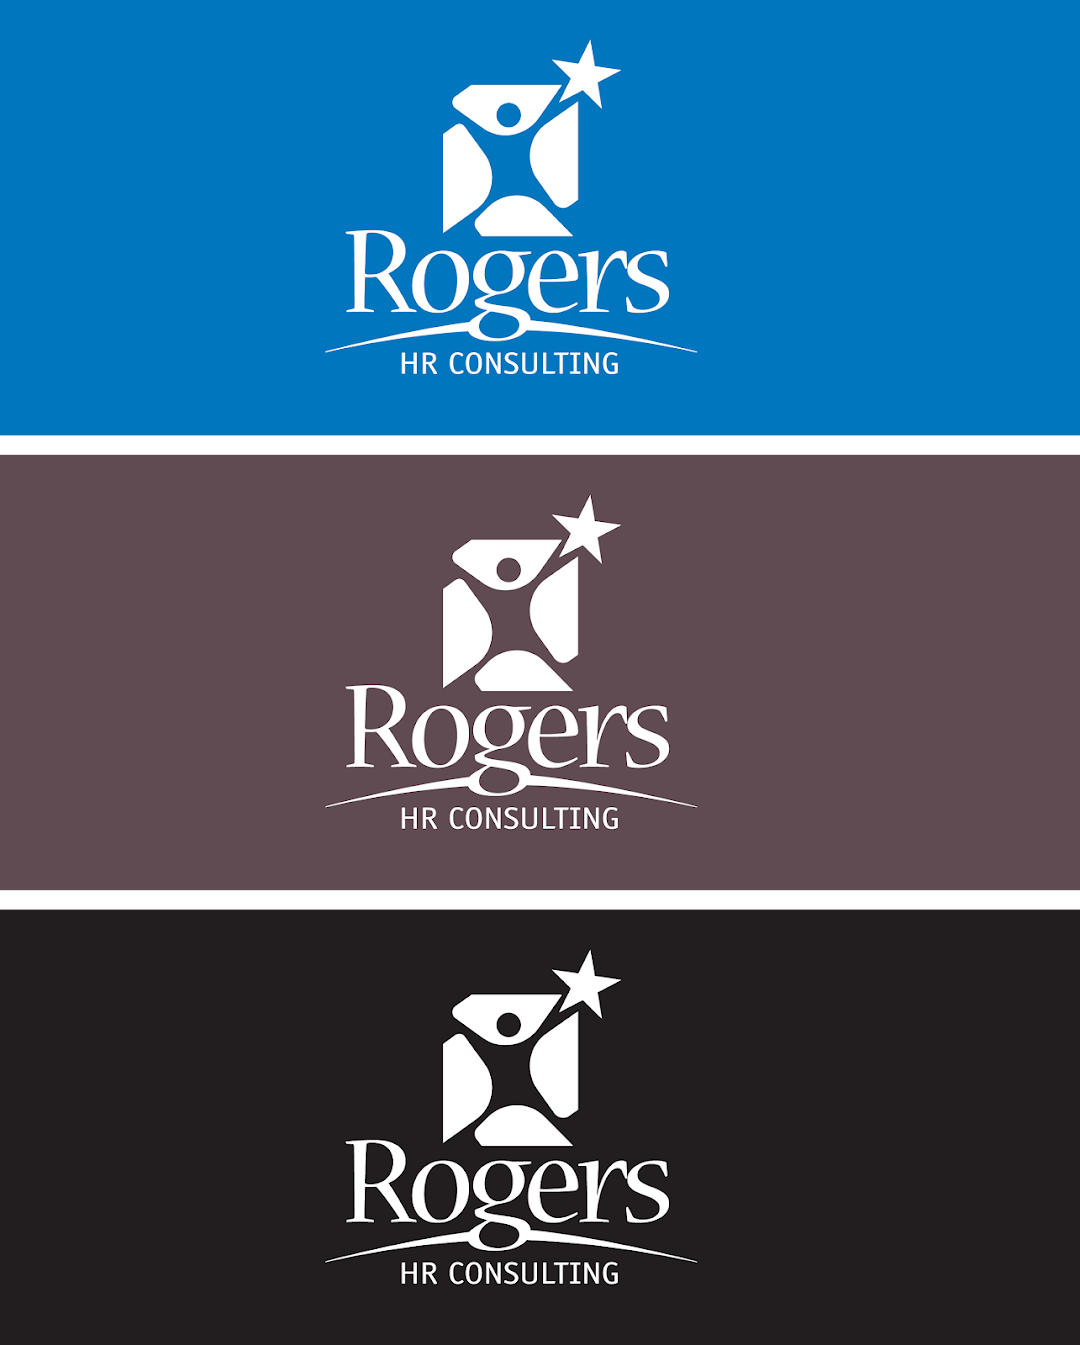 Rogers HR Consulting